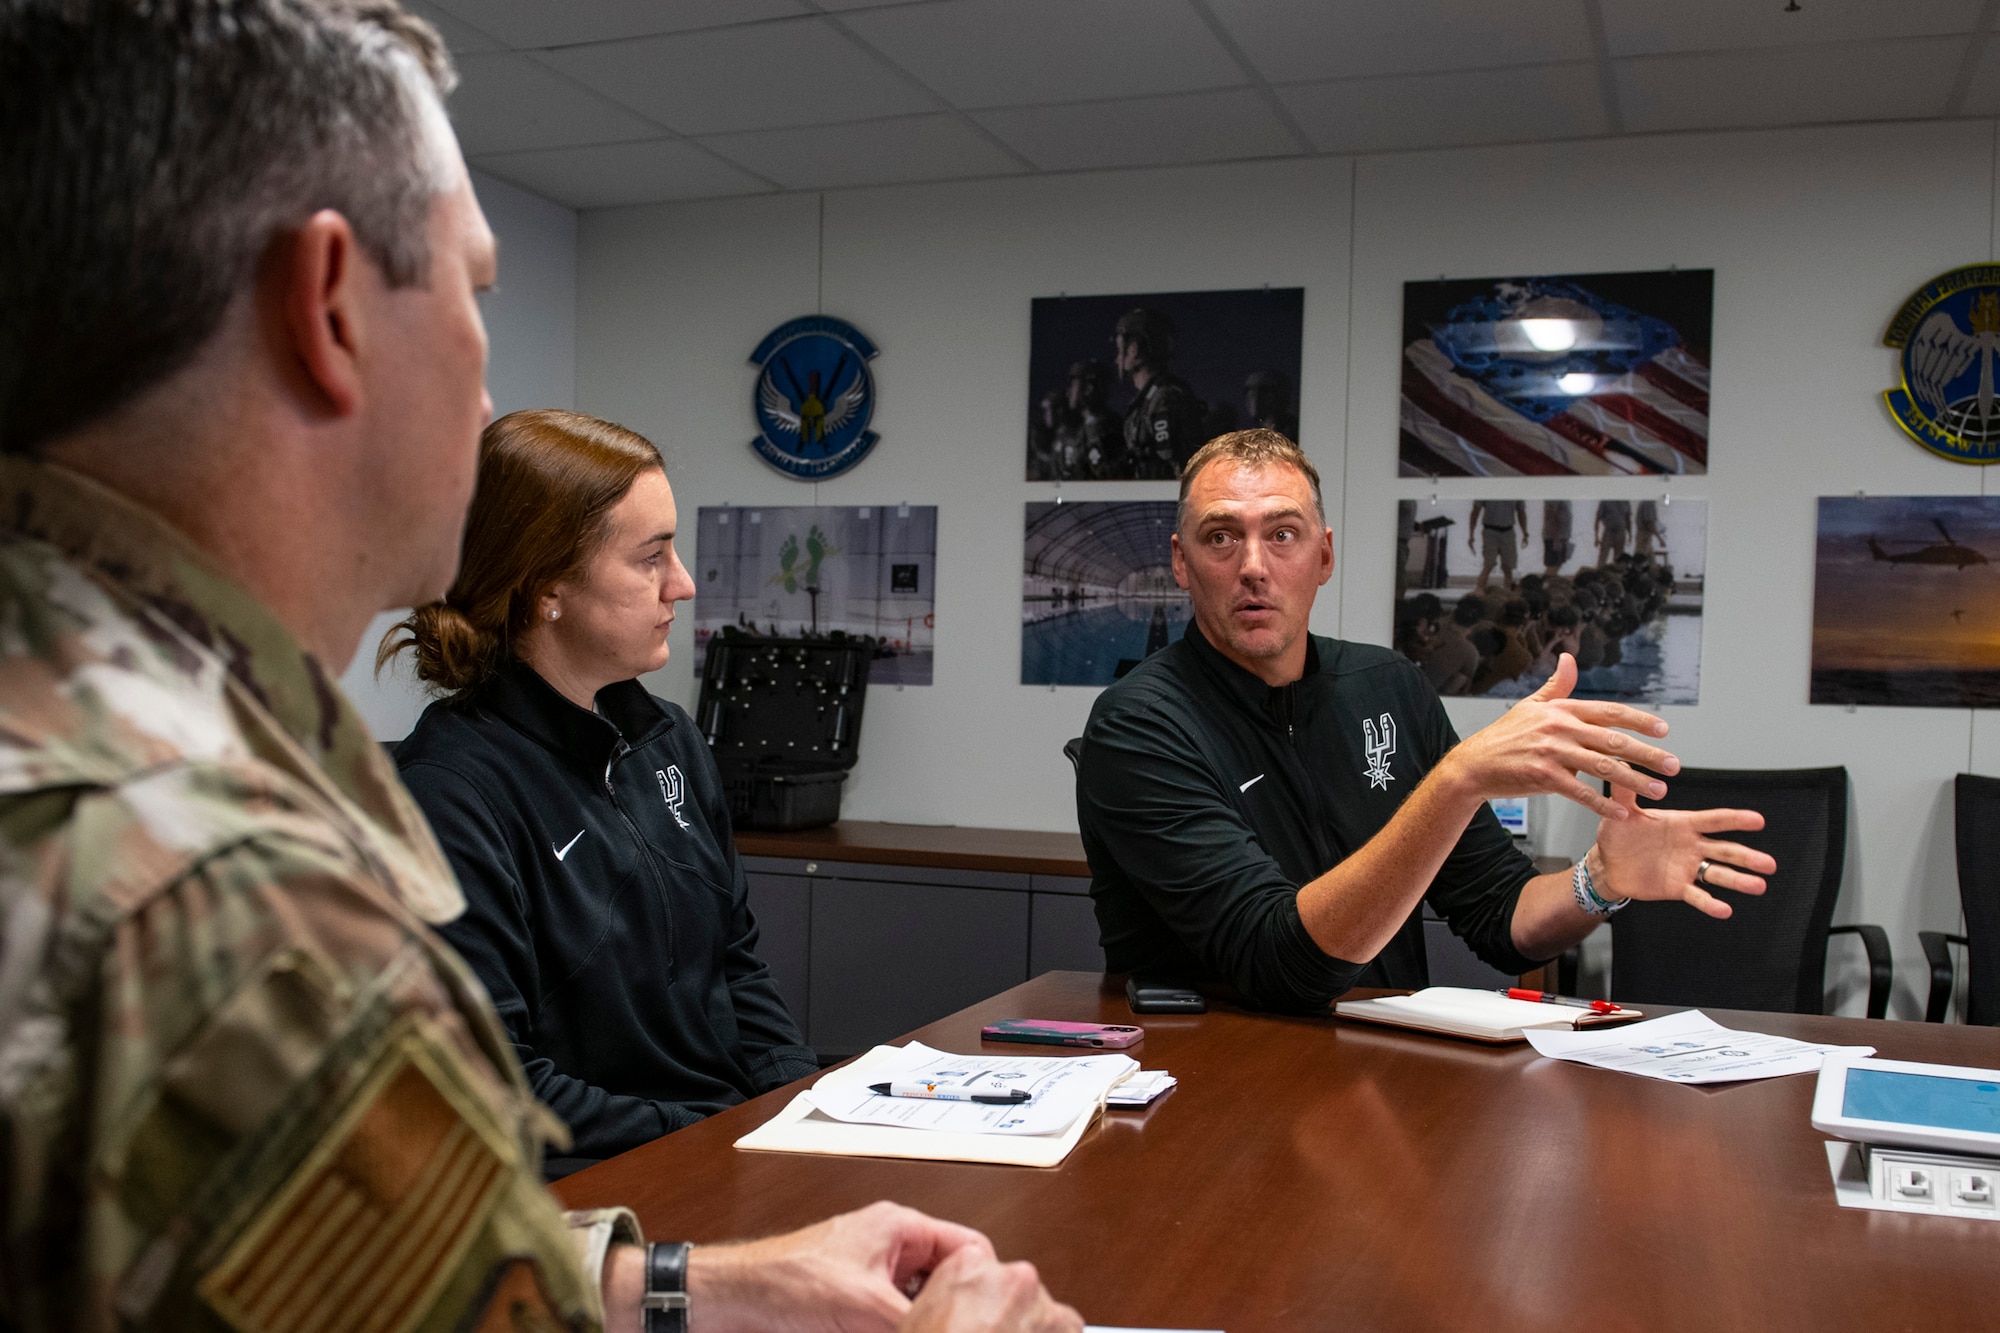 Phil Cullen, right, San Antonio Spurs director of basketball strategy, and Alison Nabatoff, center, San Antonio Spurs talent academy associate, discuss human performance integration with Col. Nathan Colunga, Special Warfare Training Wing commander, and other senior leaders from SWTW at Joint Base San Antonio-Chapman Annex, Texas, Aug. 15, 2022. The SWTW and Spurs met to discuss ideas and talk strategy on human performance. (U.S. Air Force photo by Brian J. Valencia)